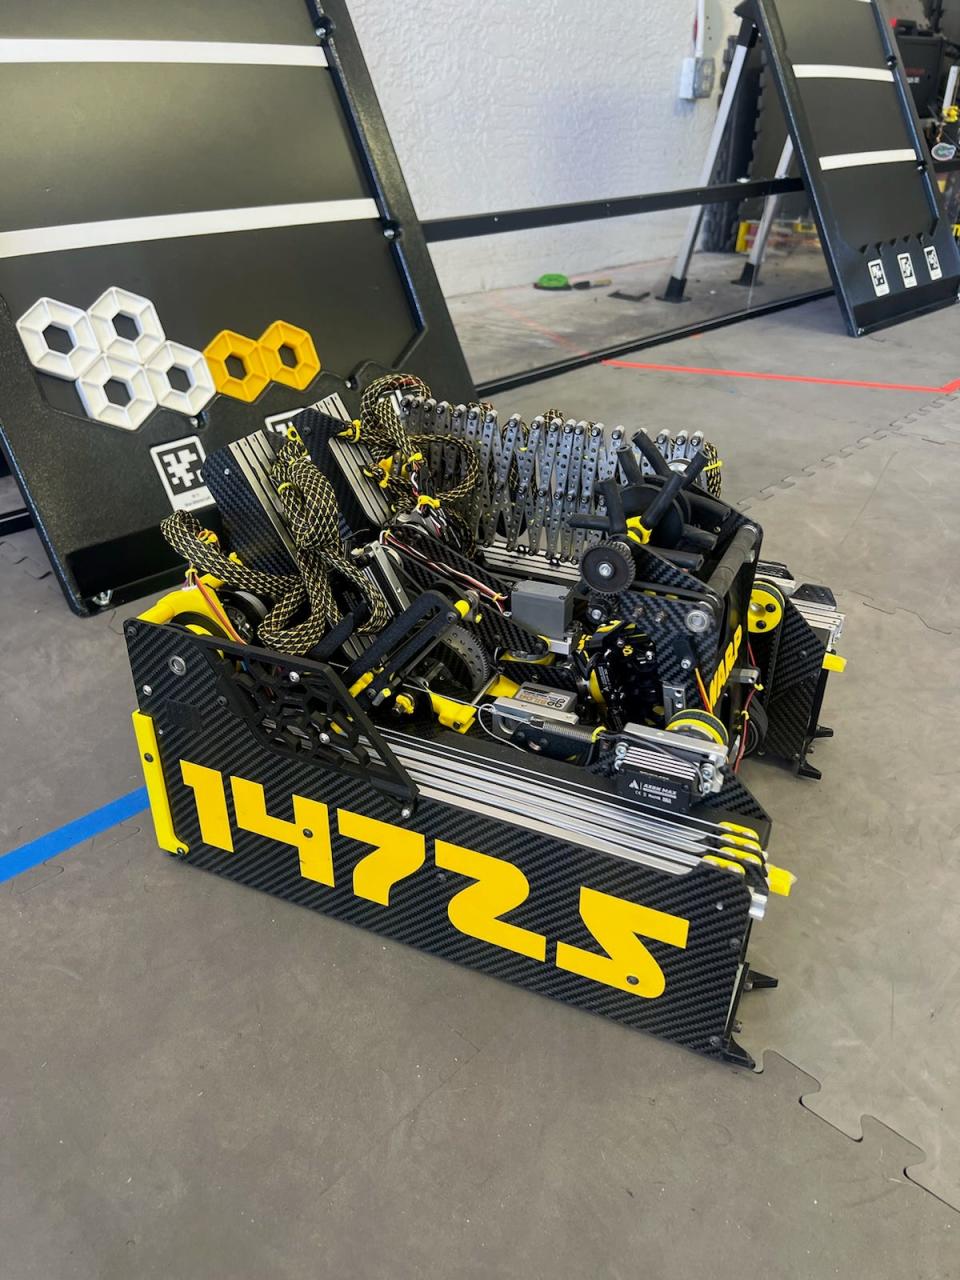 Fort Myers robotics team Java the Hutts built the approximately 35-pound robot WARP. They'll compete with WARP in the annual FIRST Championship in Houston, Texas.